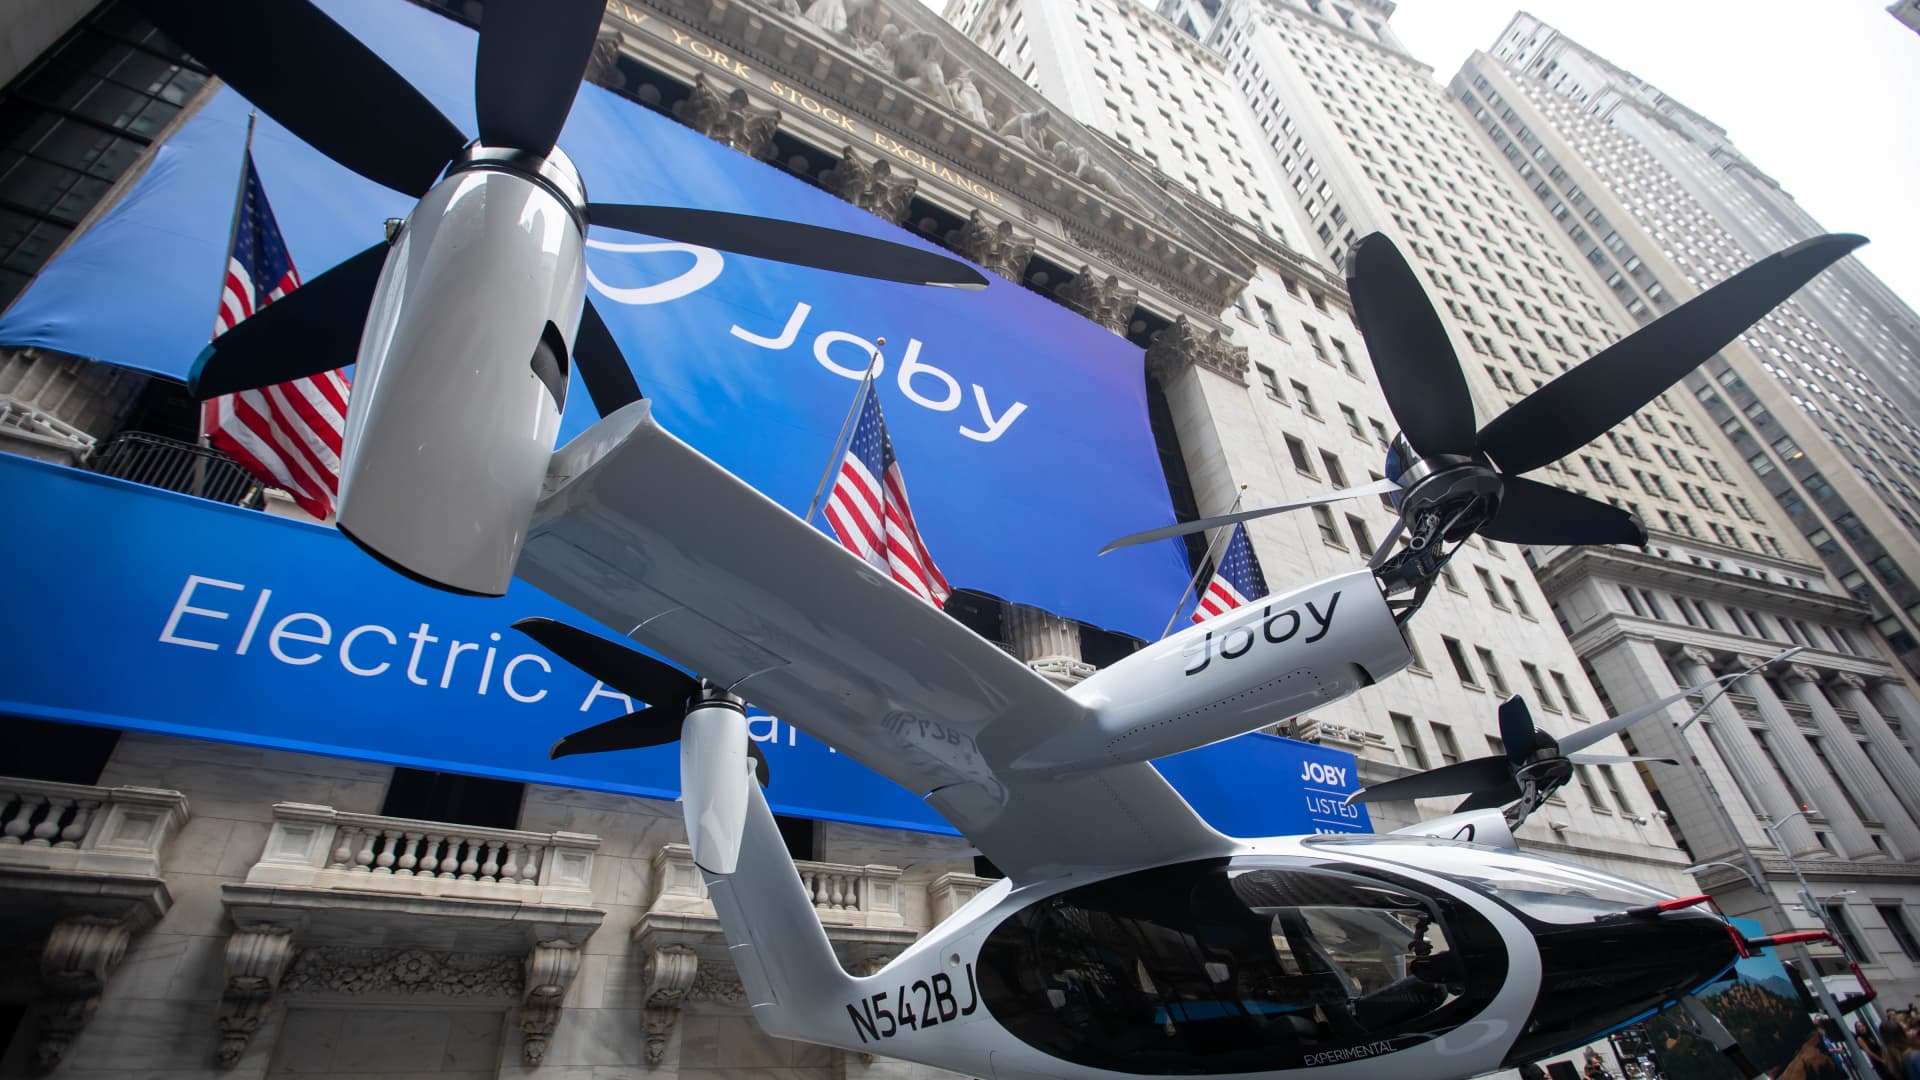 Delta invests in electric air taxi startup Joby, plans last-mile airport service